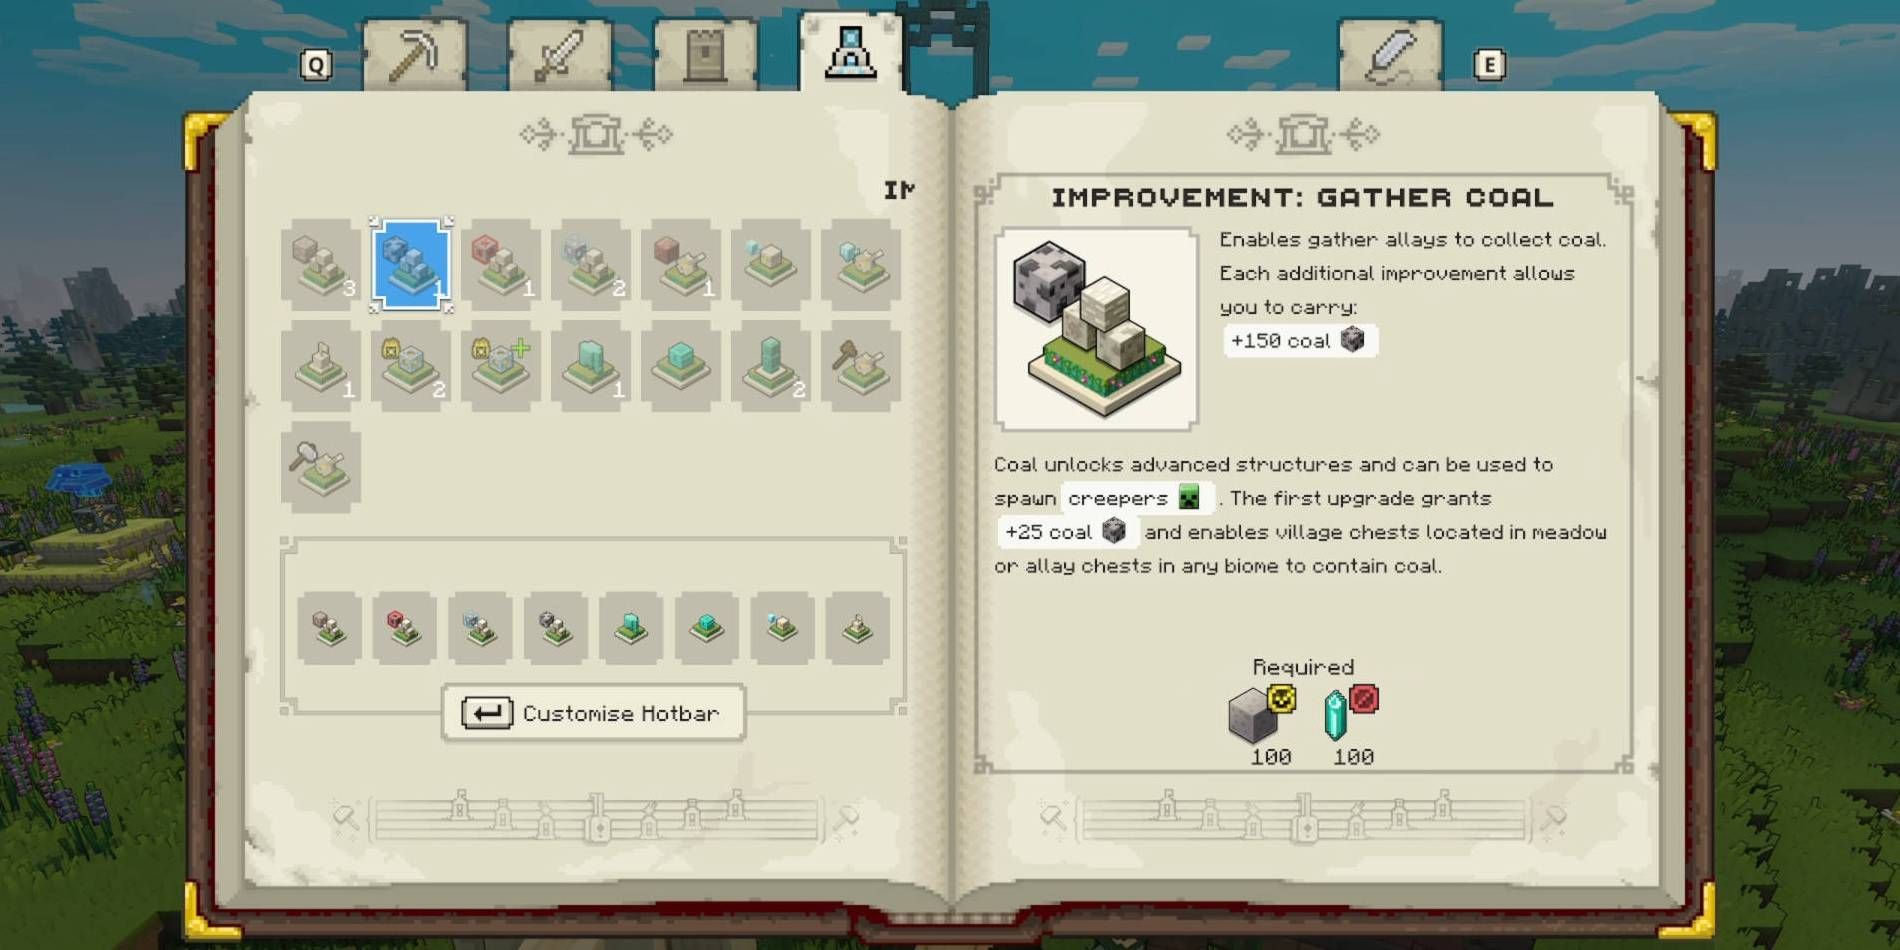 Minecraft Legends Improvement: Gather Coal Melody in Melody Book for Players to Upgrade